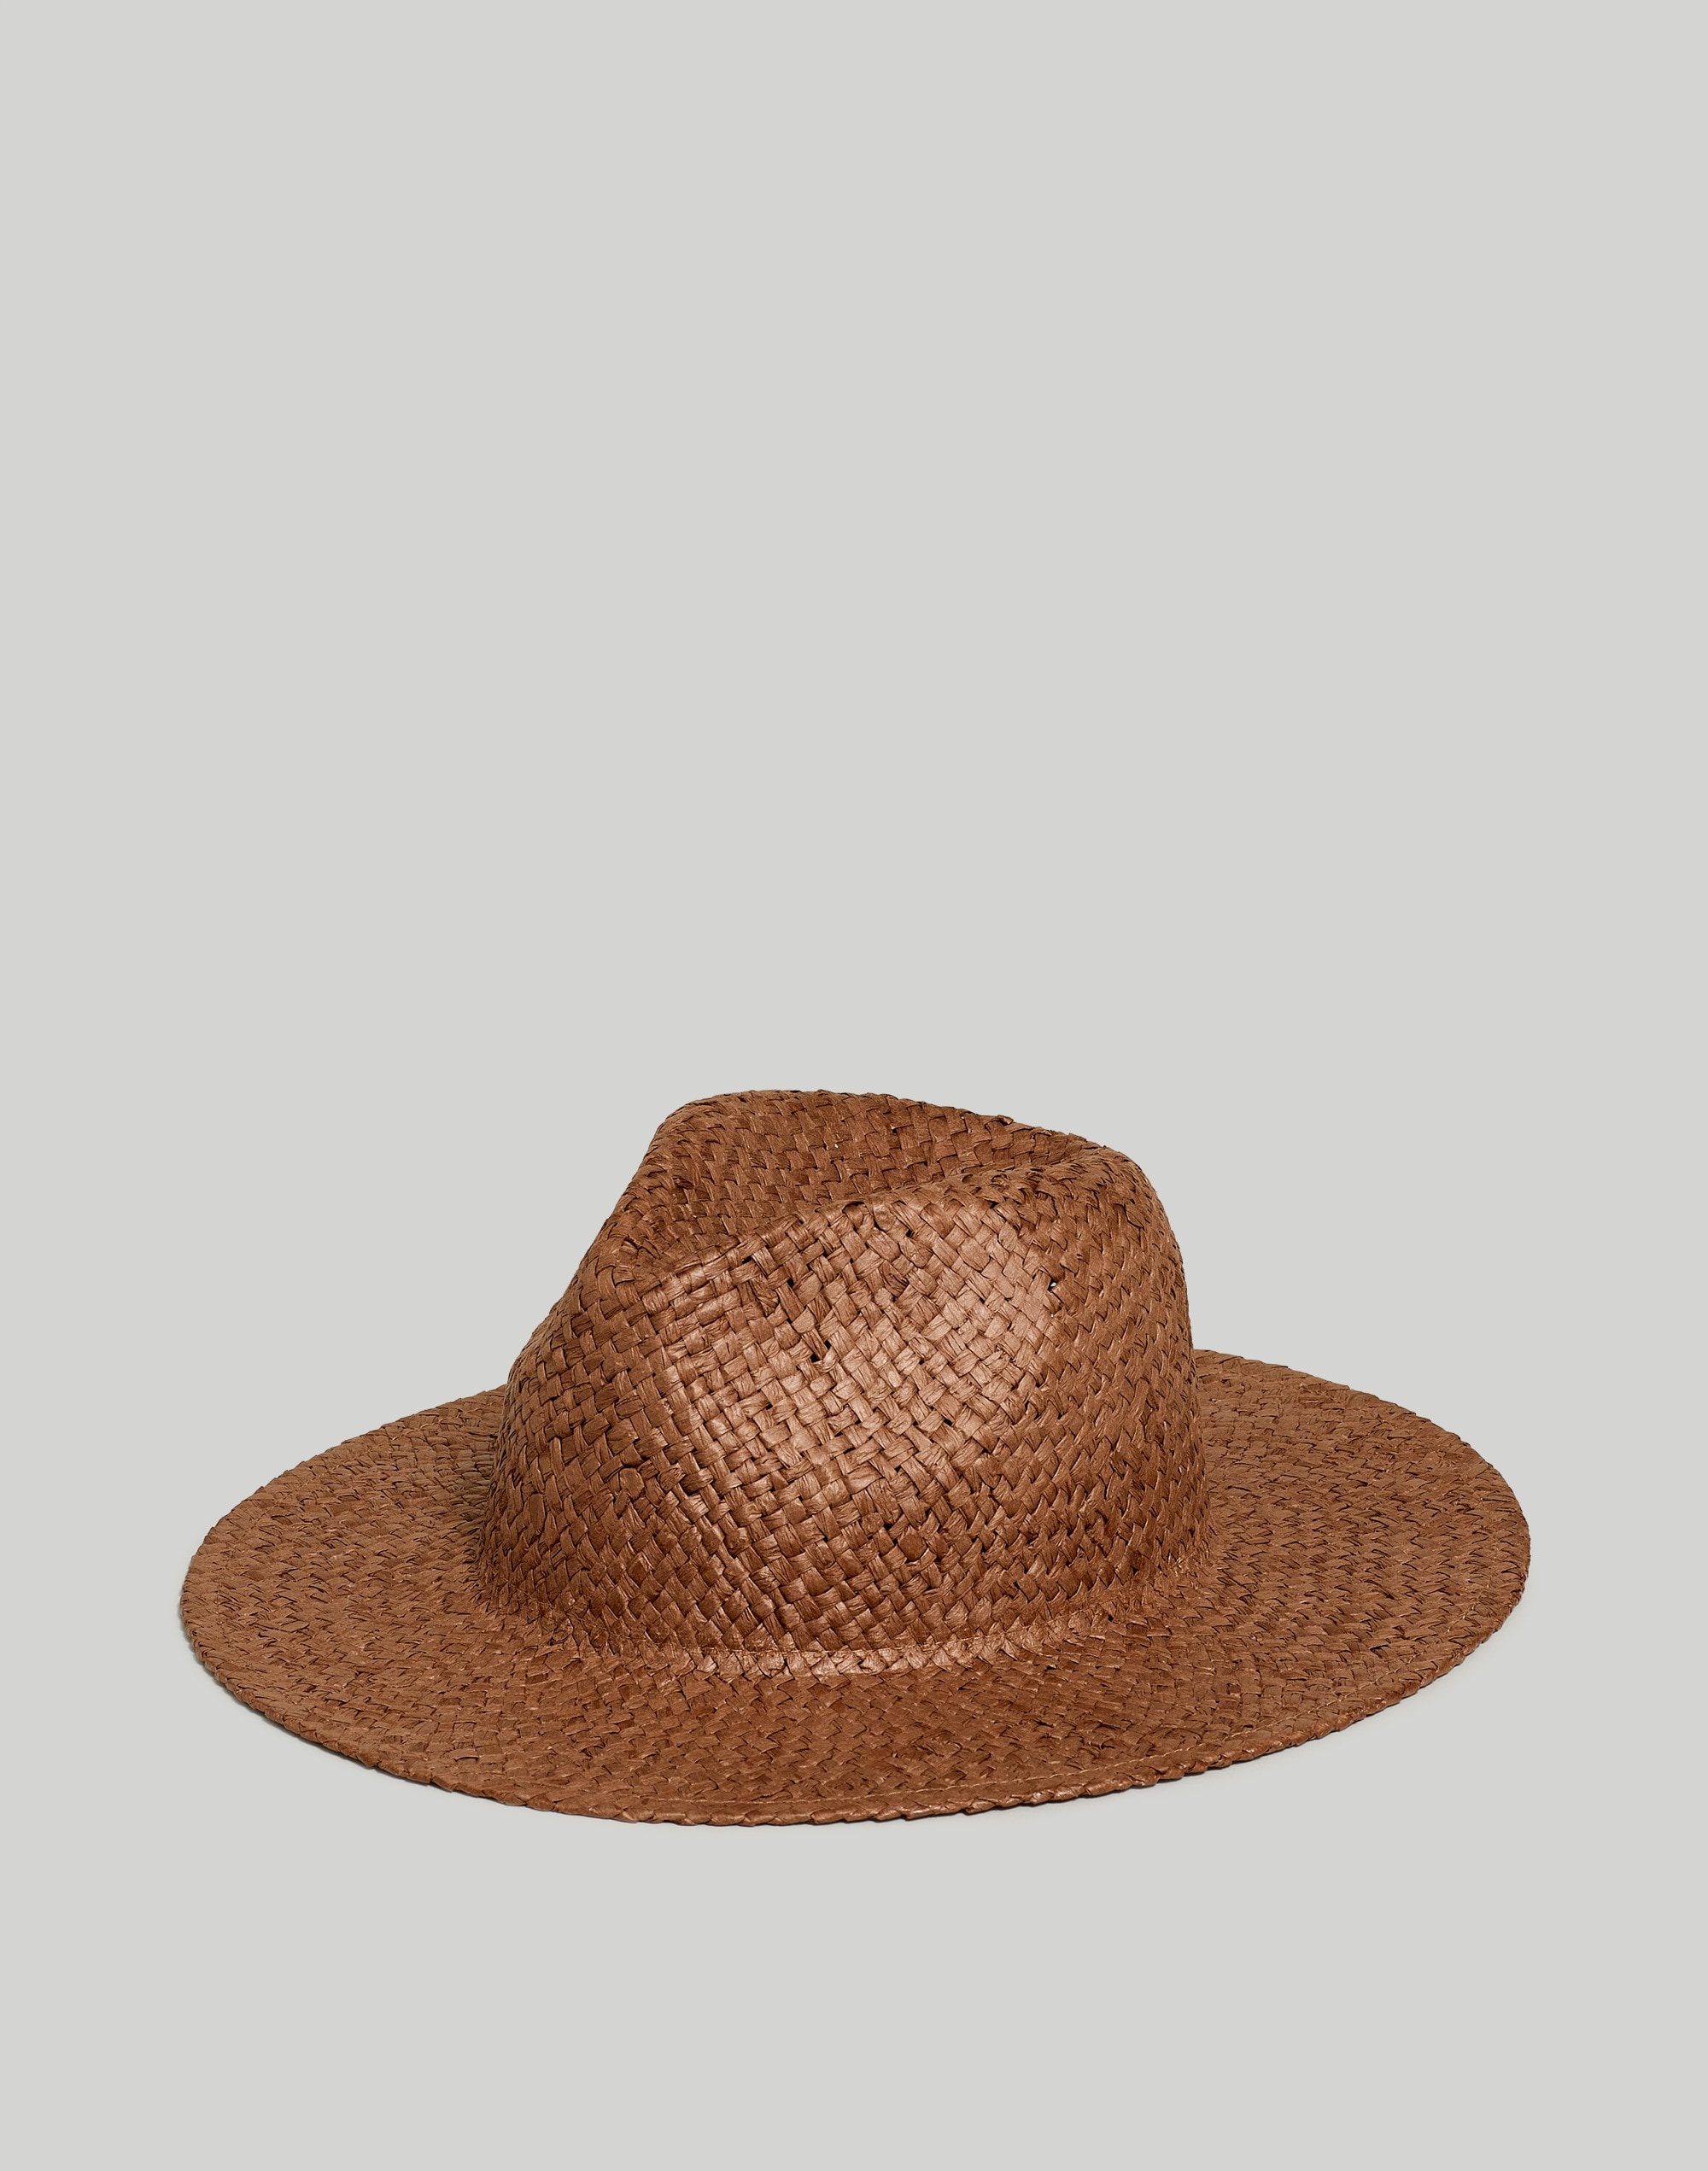 Madewell Woven Straw Hat in Chocolate Raisin - Size S-M